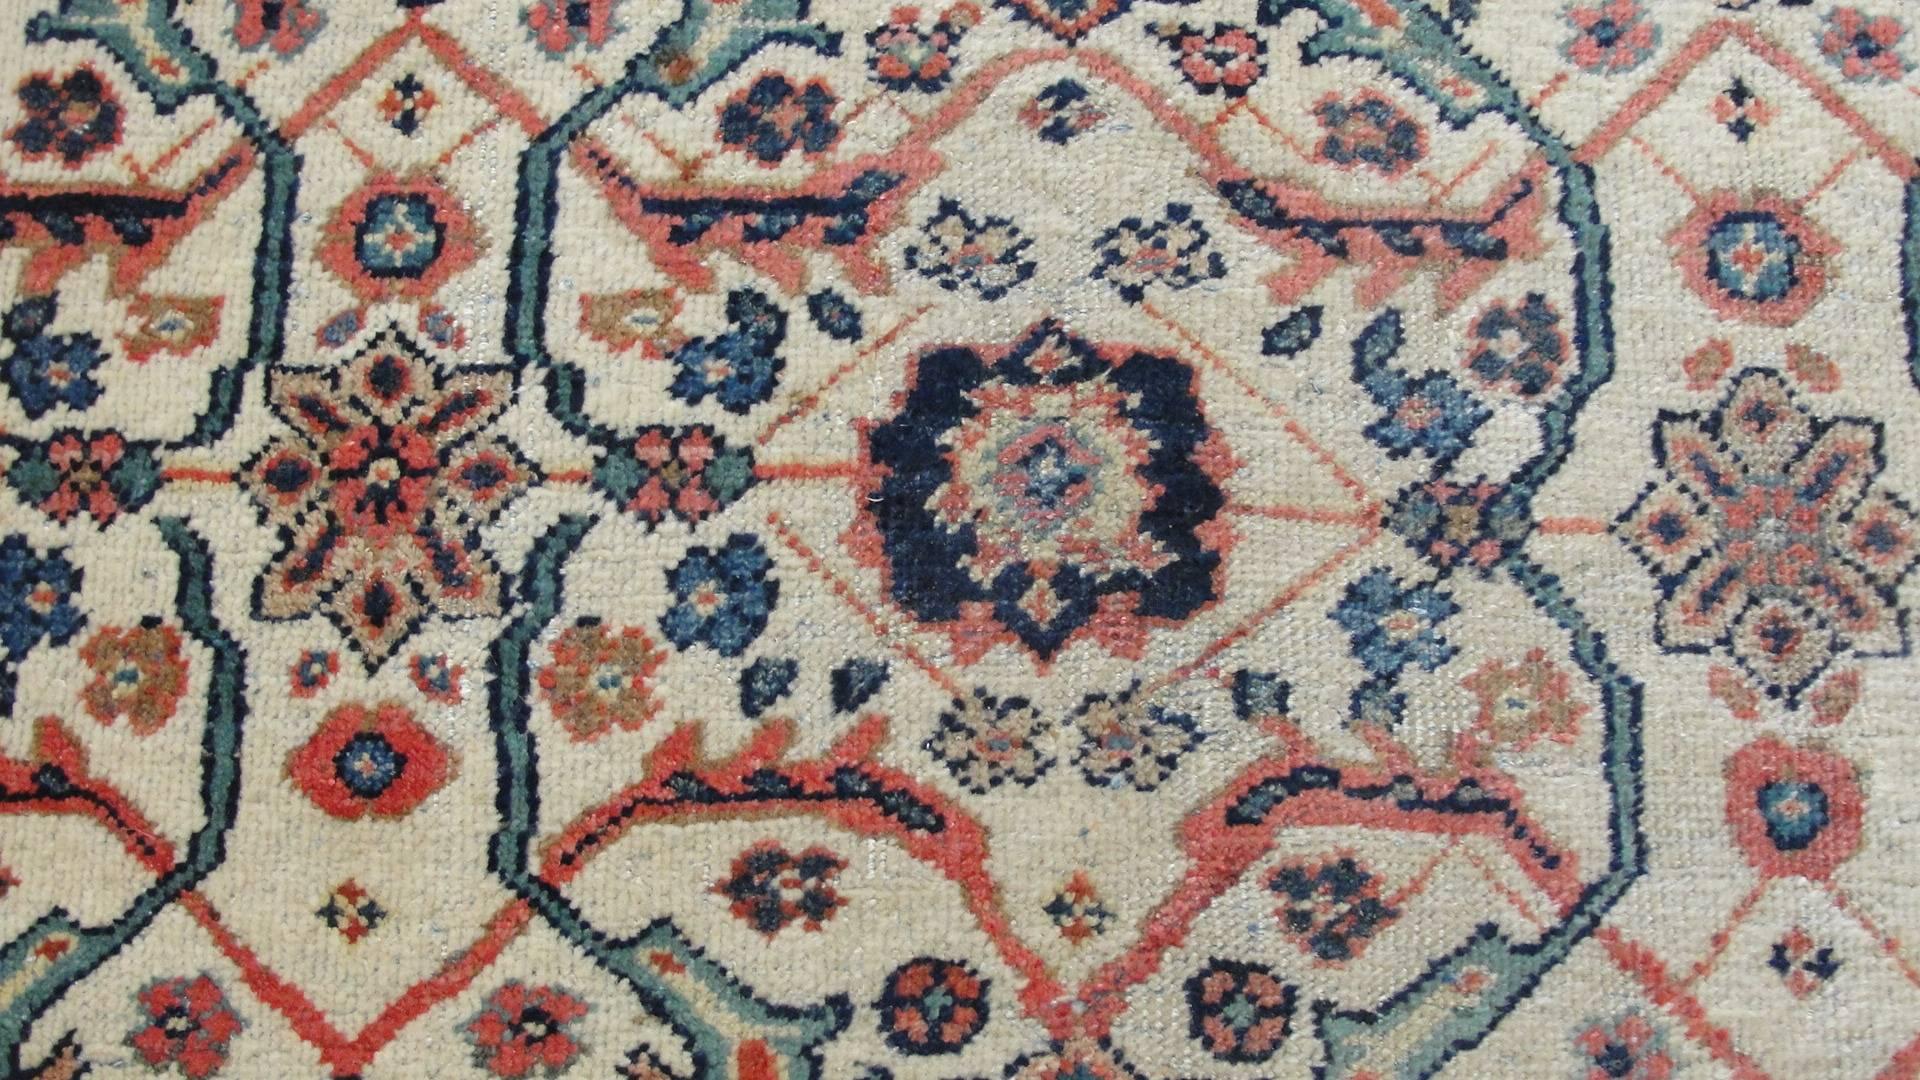 Wool  Antique Persian Sultanabad Carpet, 7' x 10' For Sale